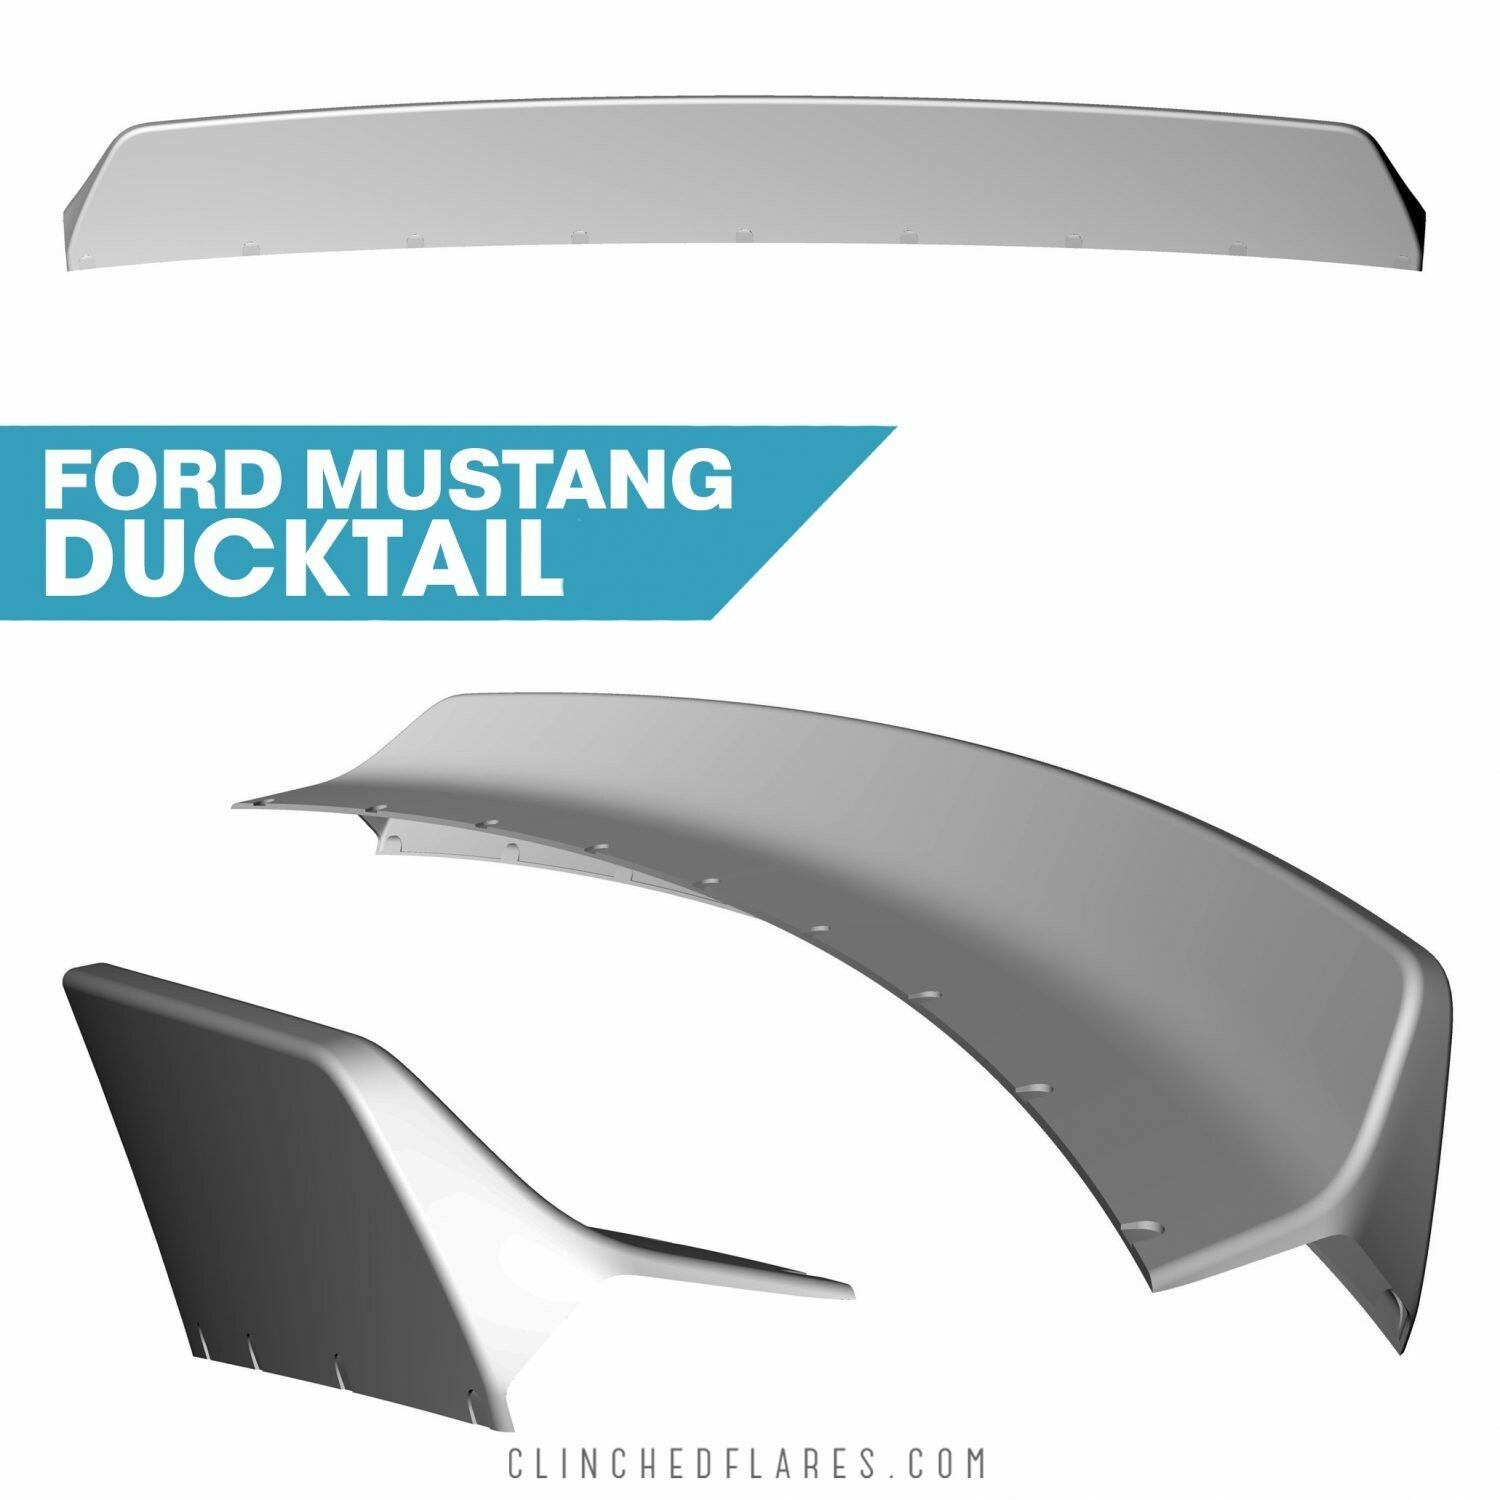 Ford Mustang S550 Ducktail Spoiler